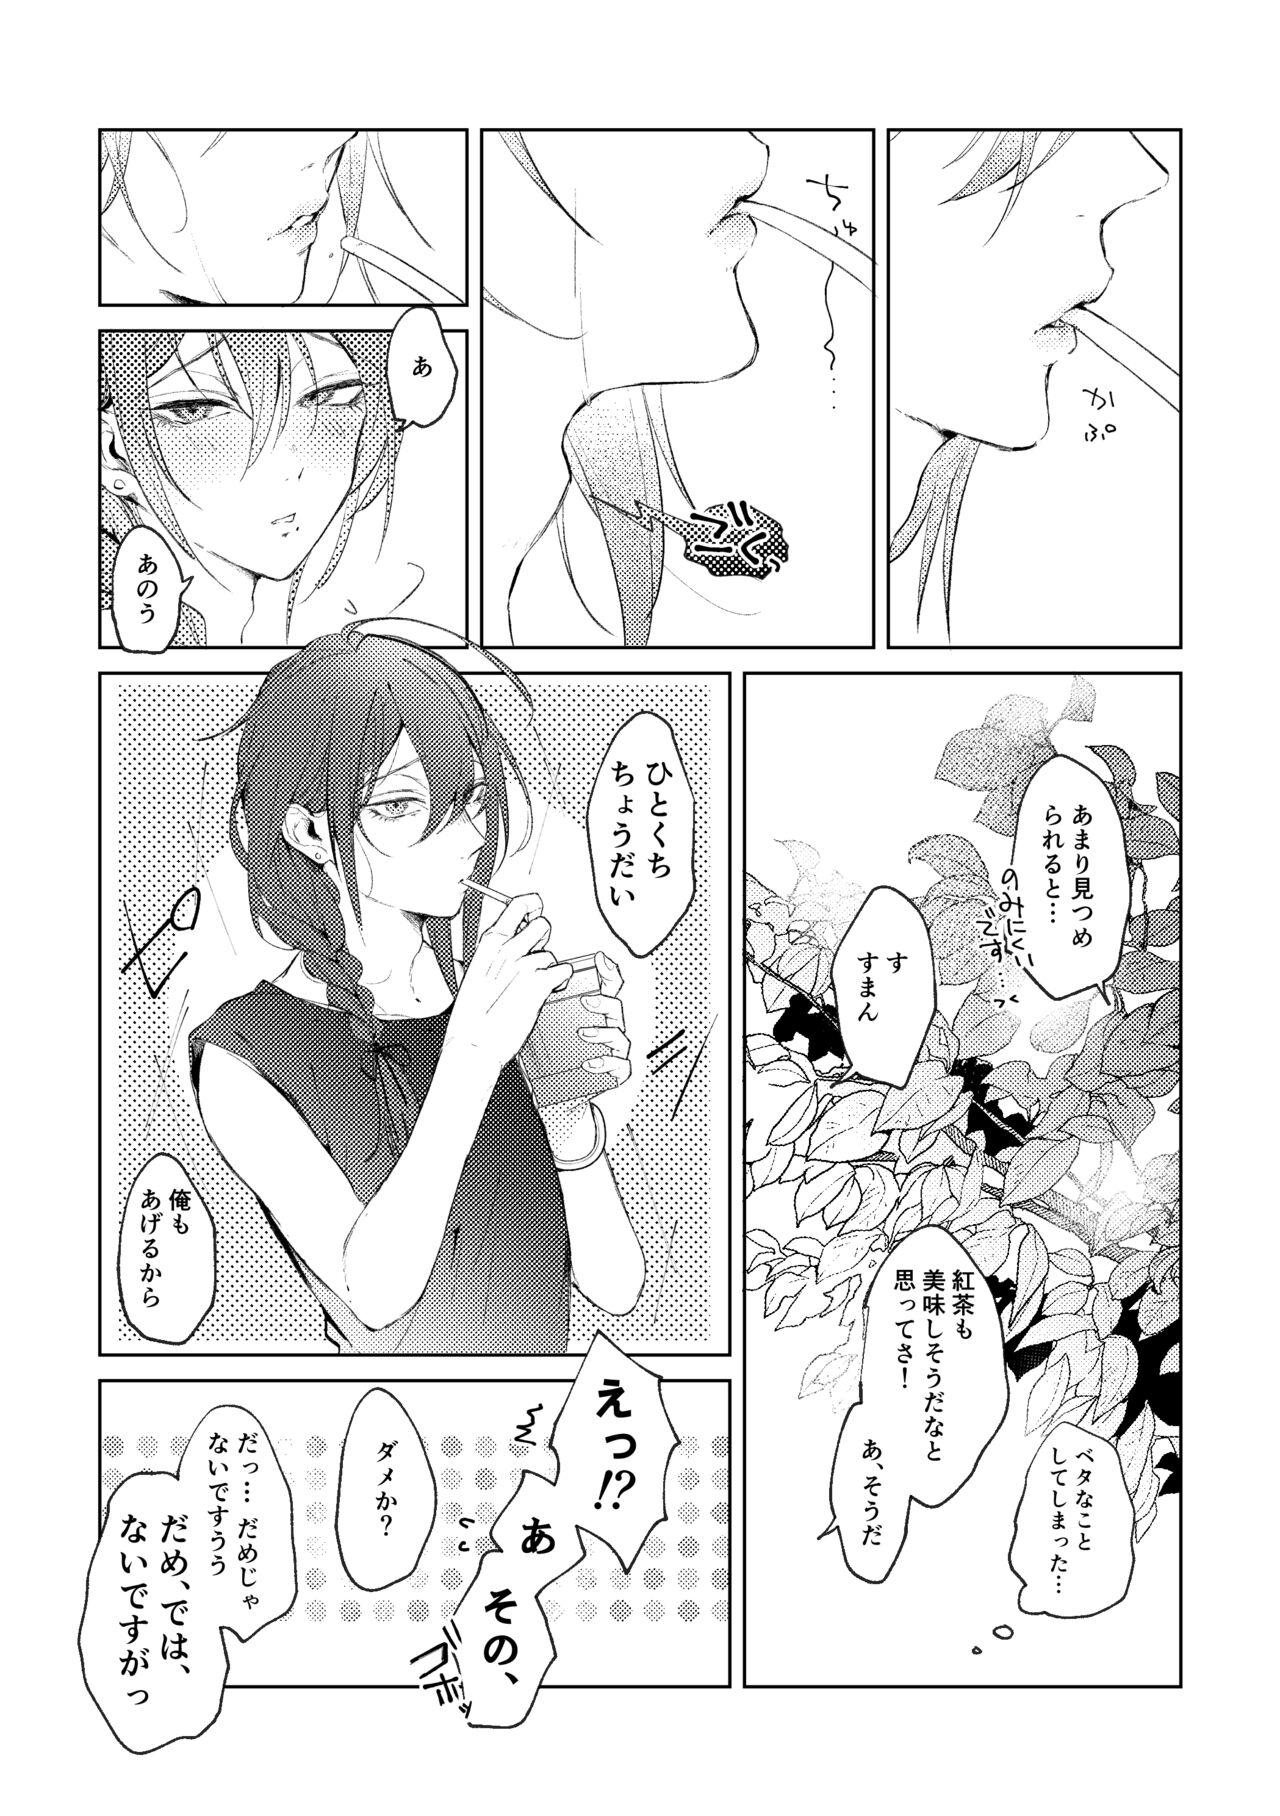 Bubble Butt 俺のカノジョのマヨイくん。 - Ensemble stars Roleplay - Page 11